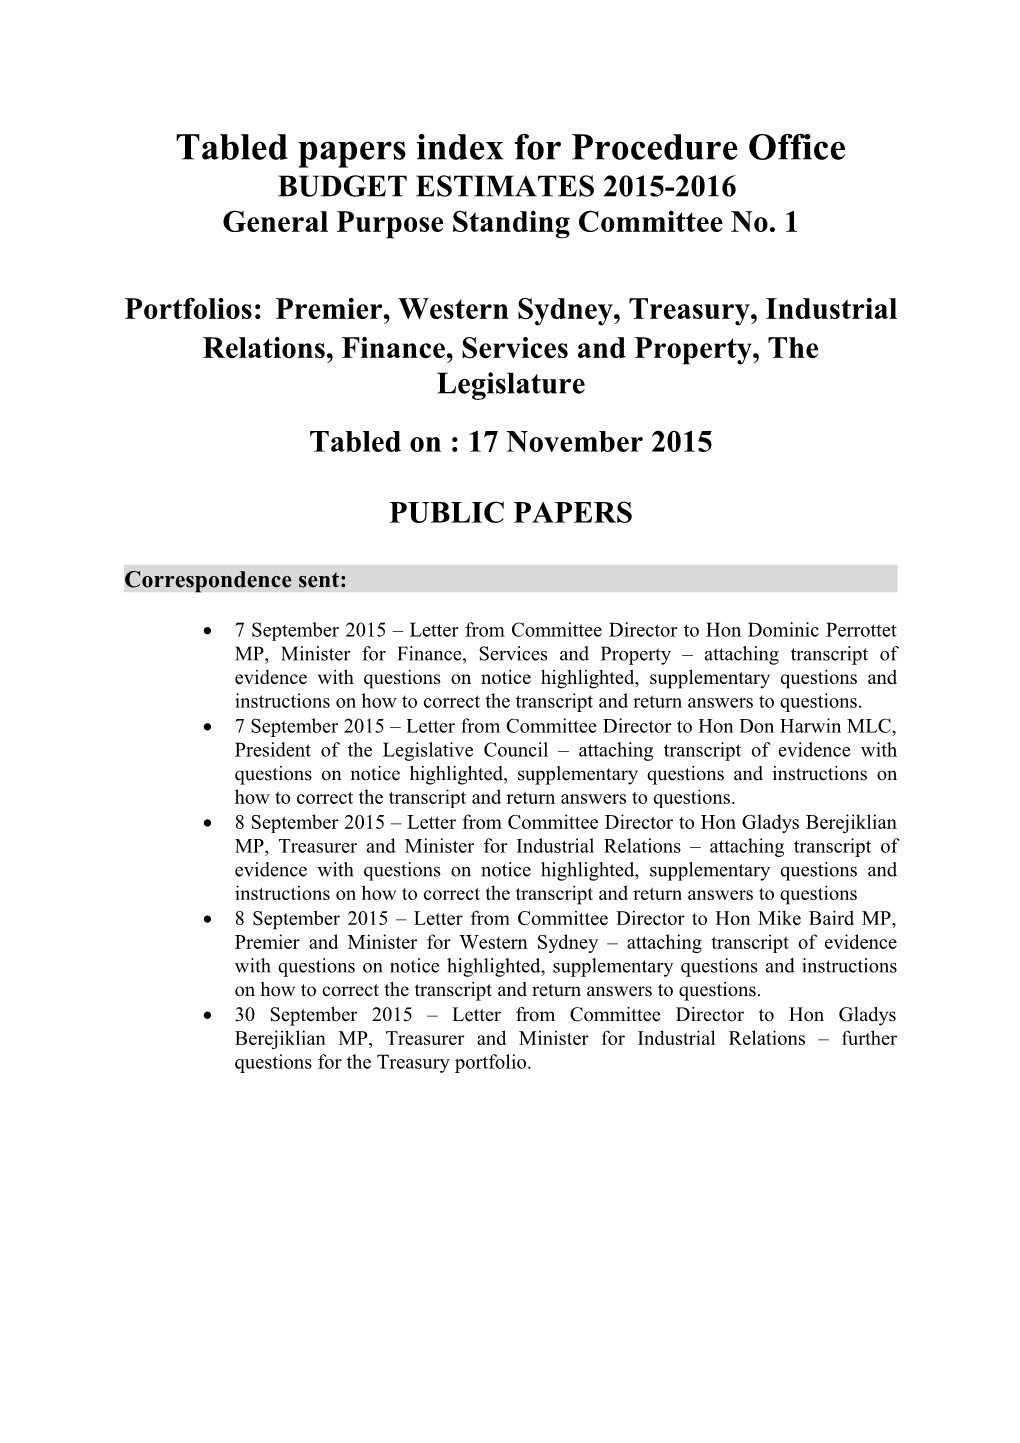 Tabled Papers Index - Budget Estimates GPSC 1